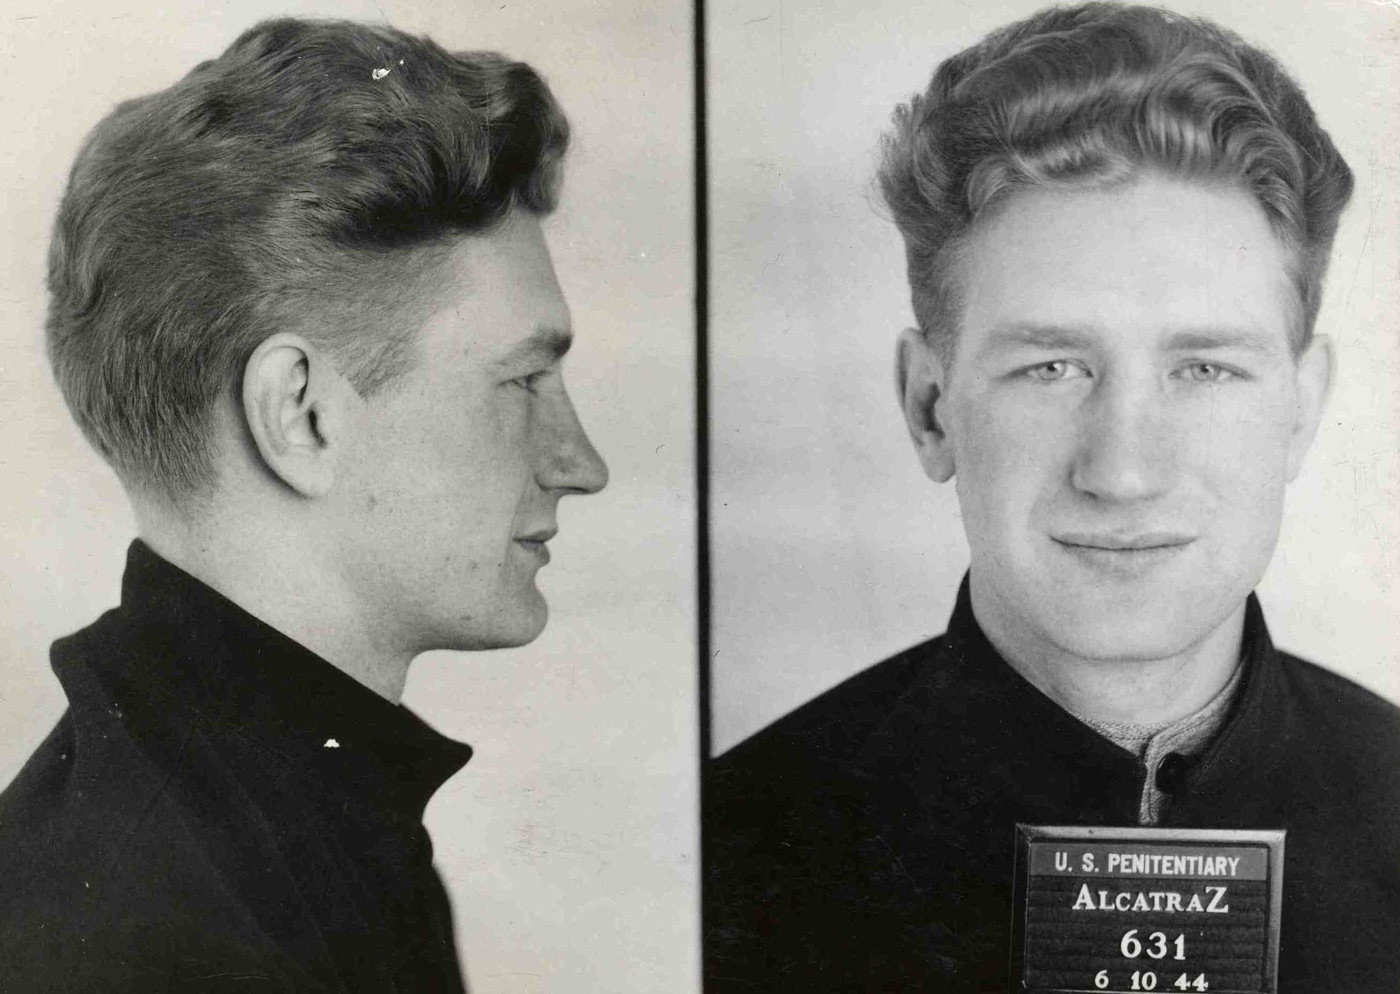 The booking photo of John Elgin Johnson when he arrived at Alcatraz prison on June 10, 1944. Johnson murdered Special Agent J. Brady Murphy on September 25, 1953. National Archives photograph. 